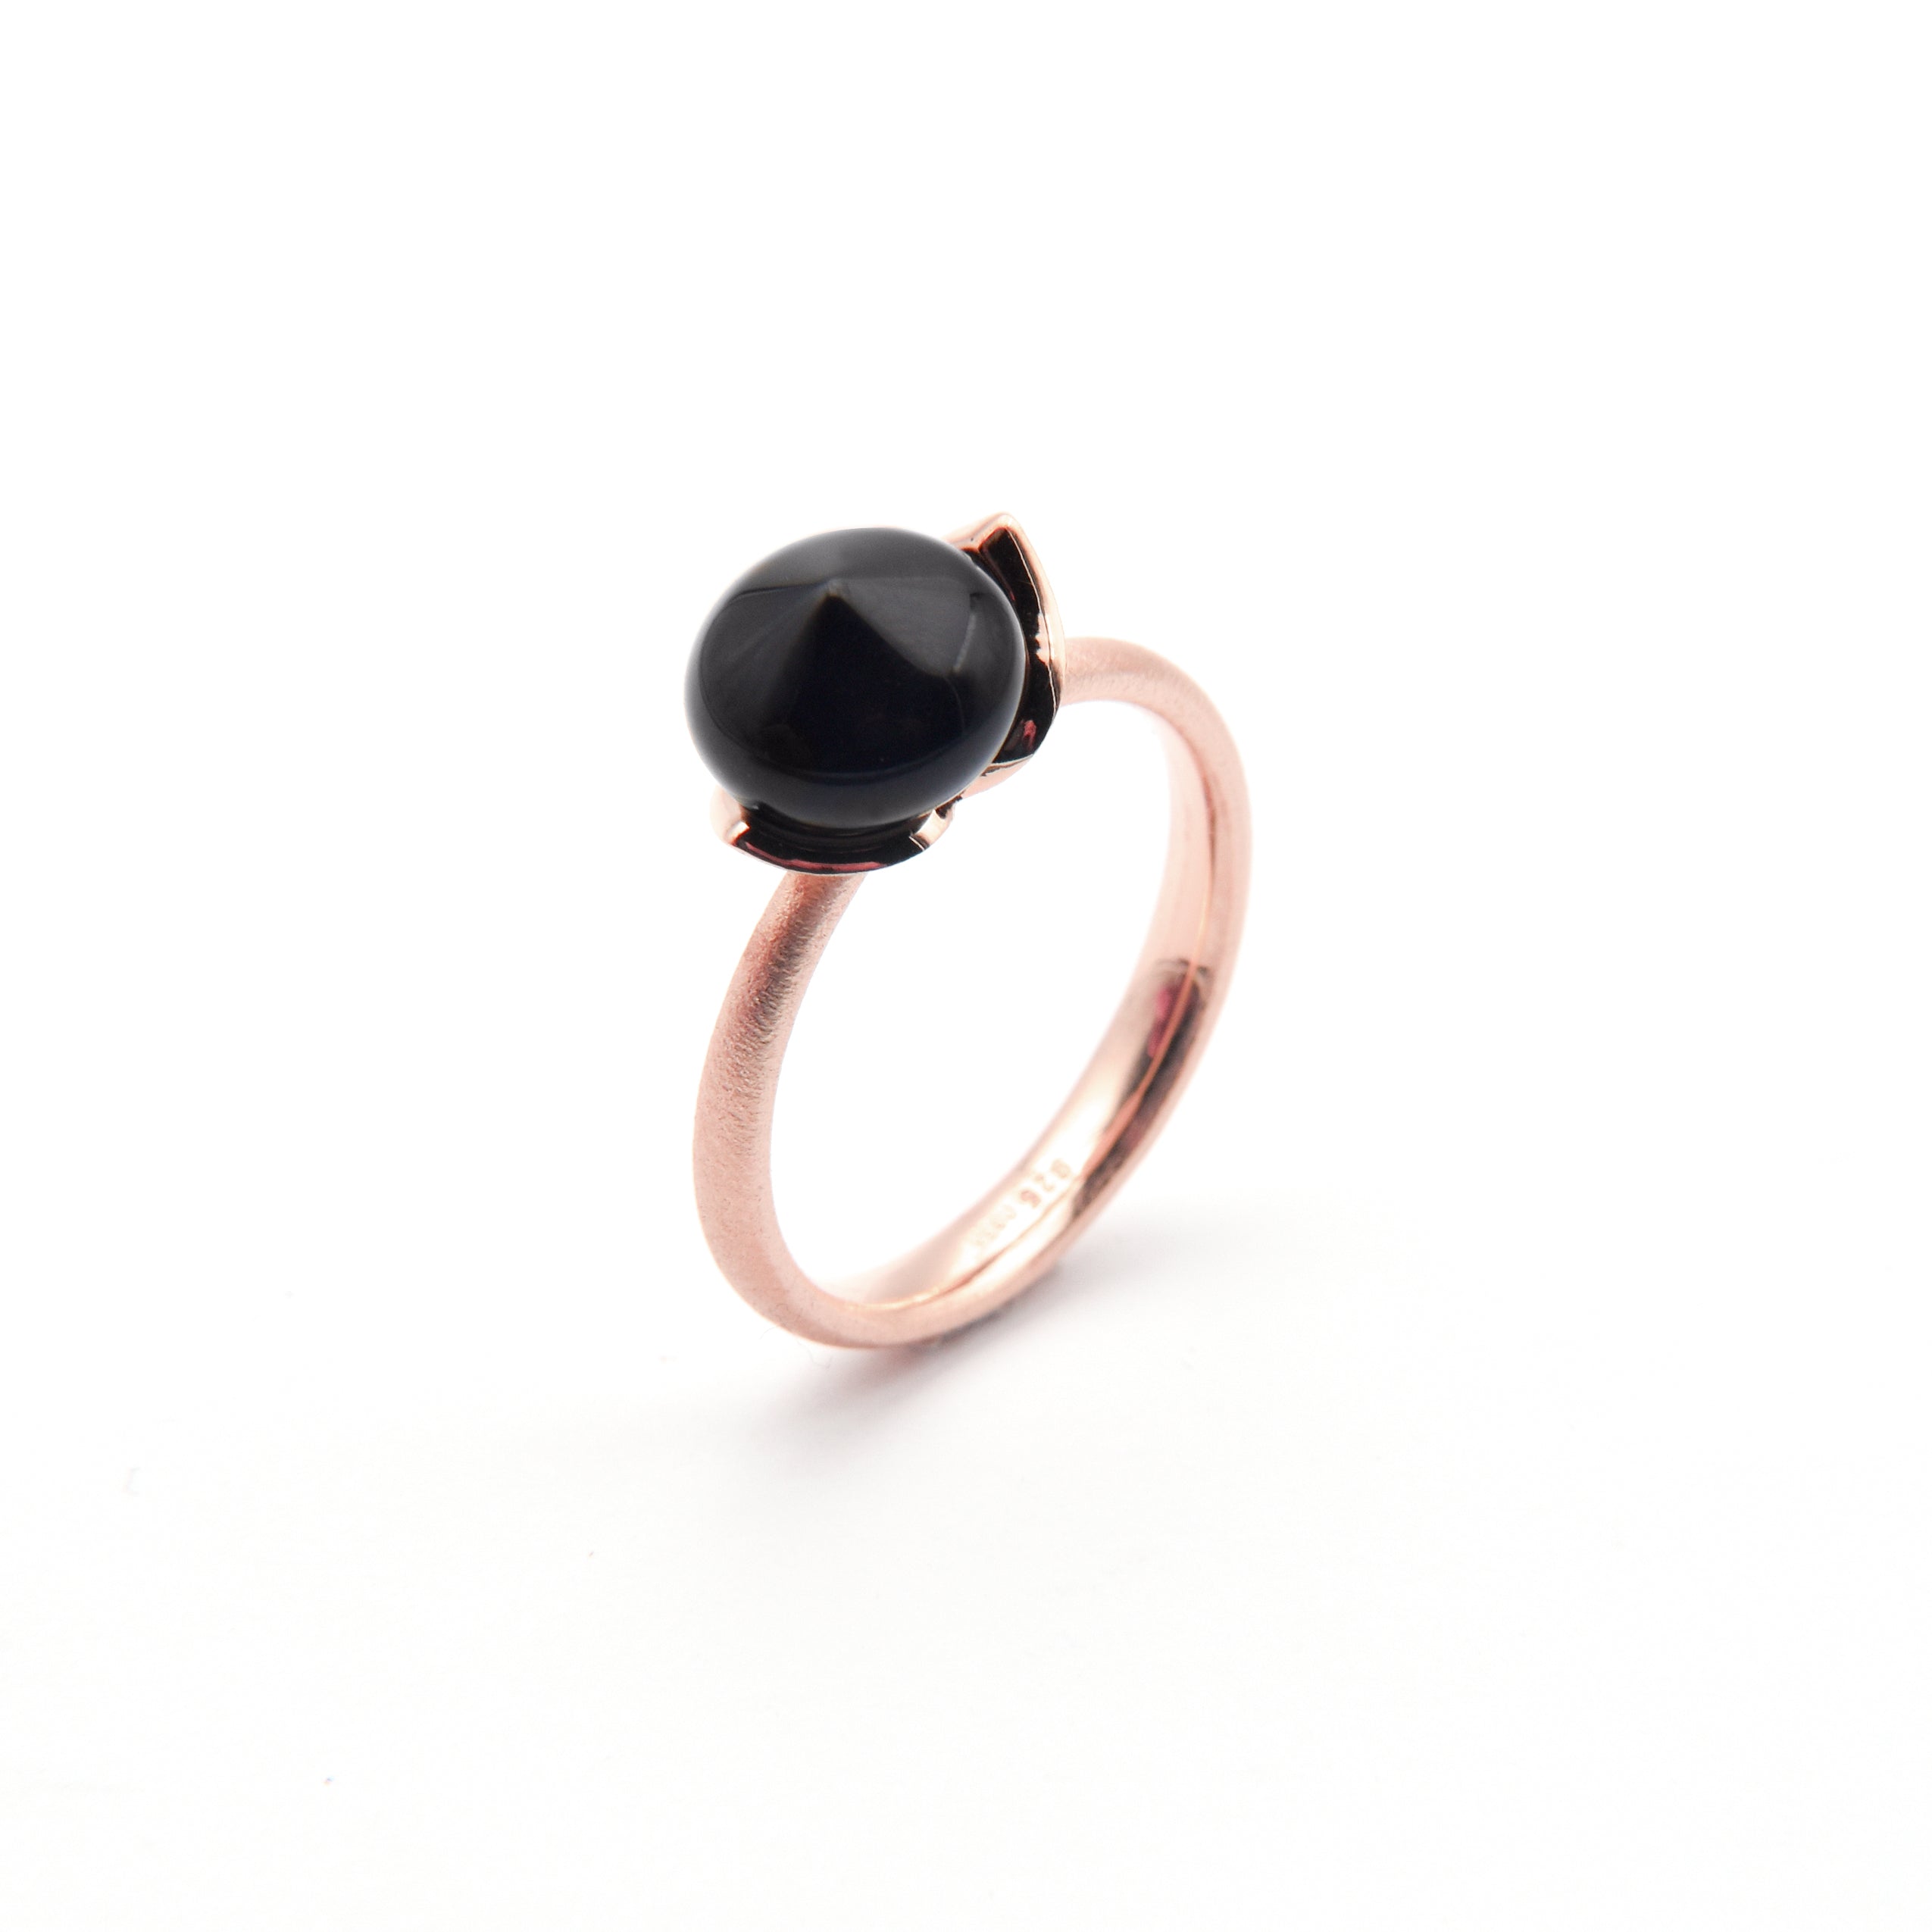 Dolce Ring "smal" mit Onix 925/-